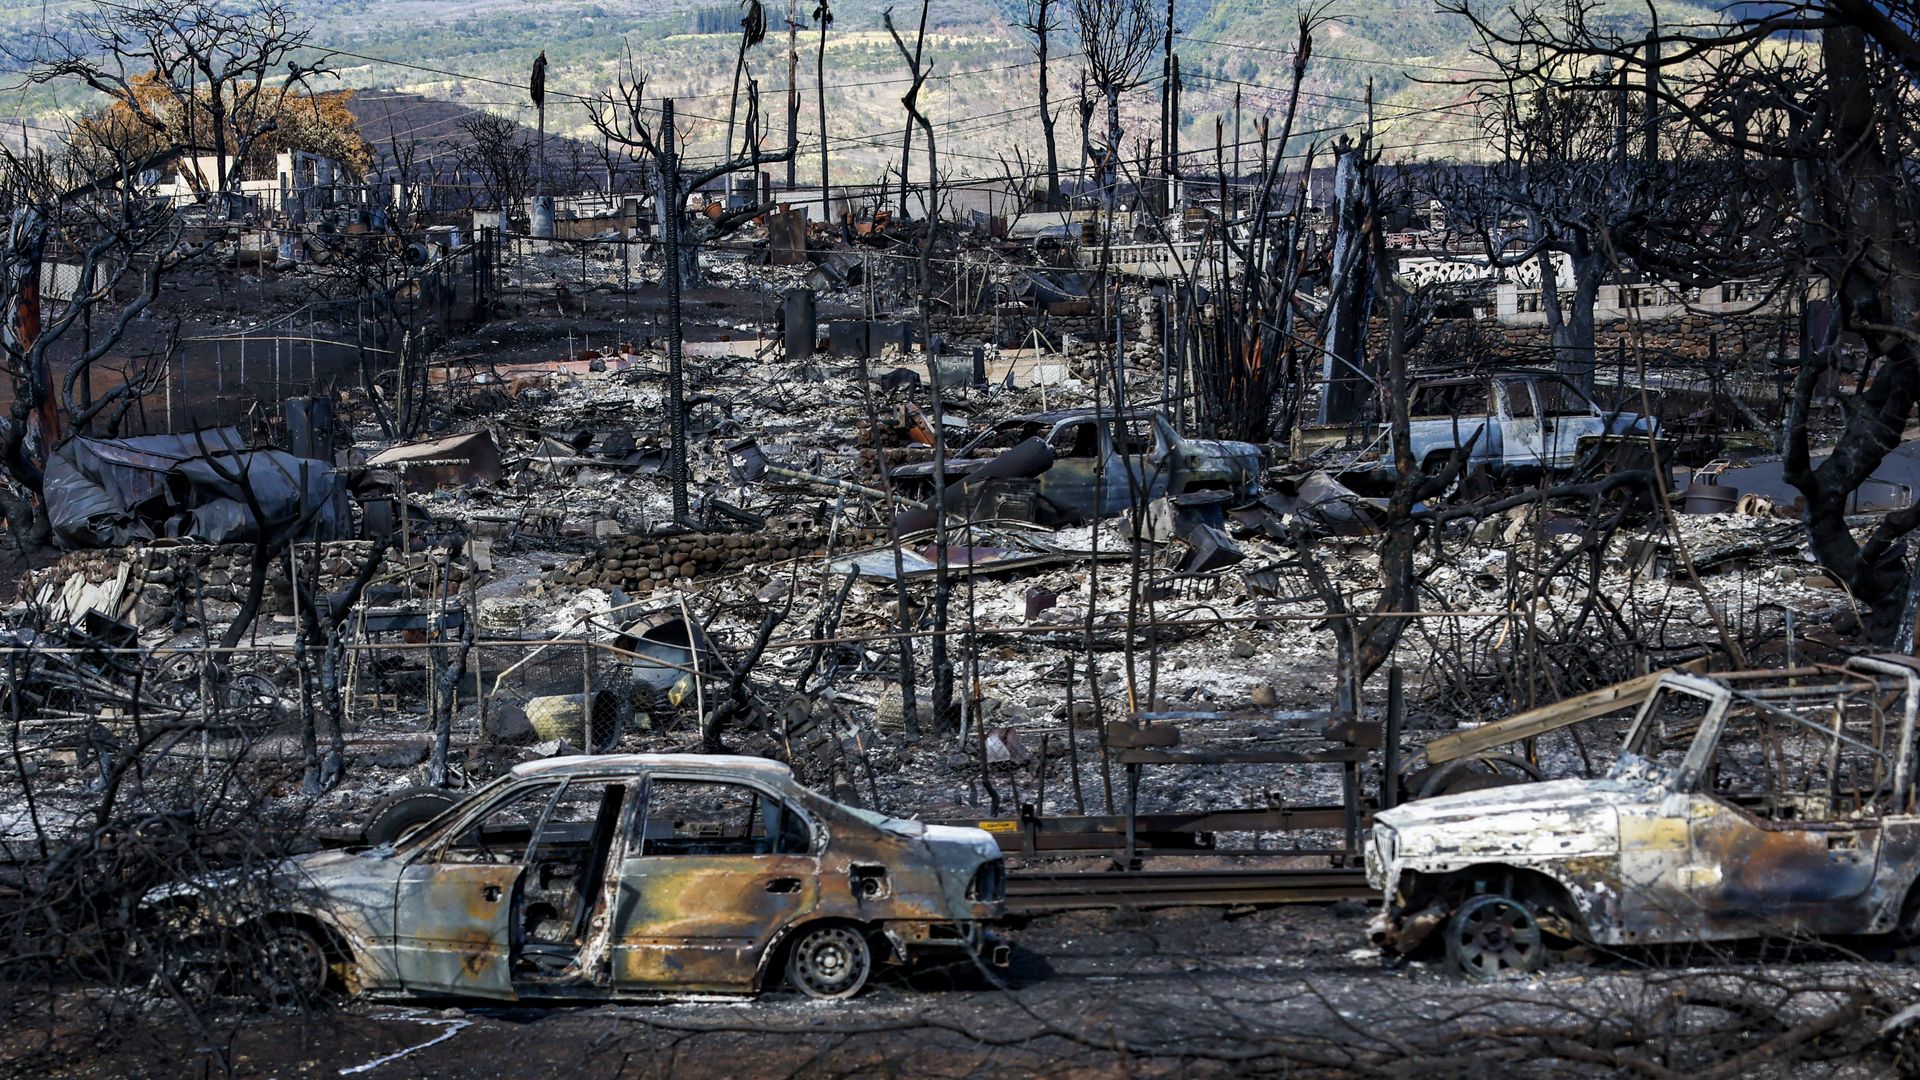  A view of destruction from Hwy 30 days after a fierce wildfire destroyed the town.